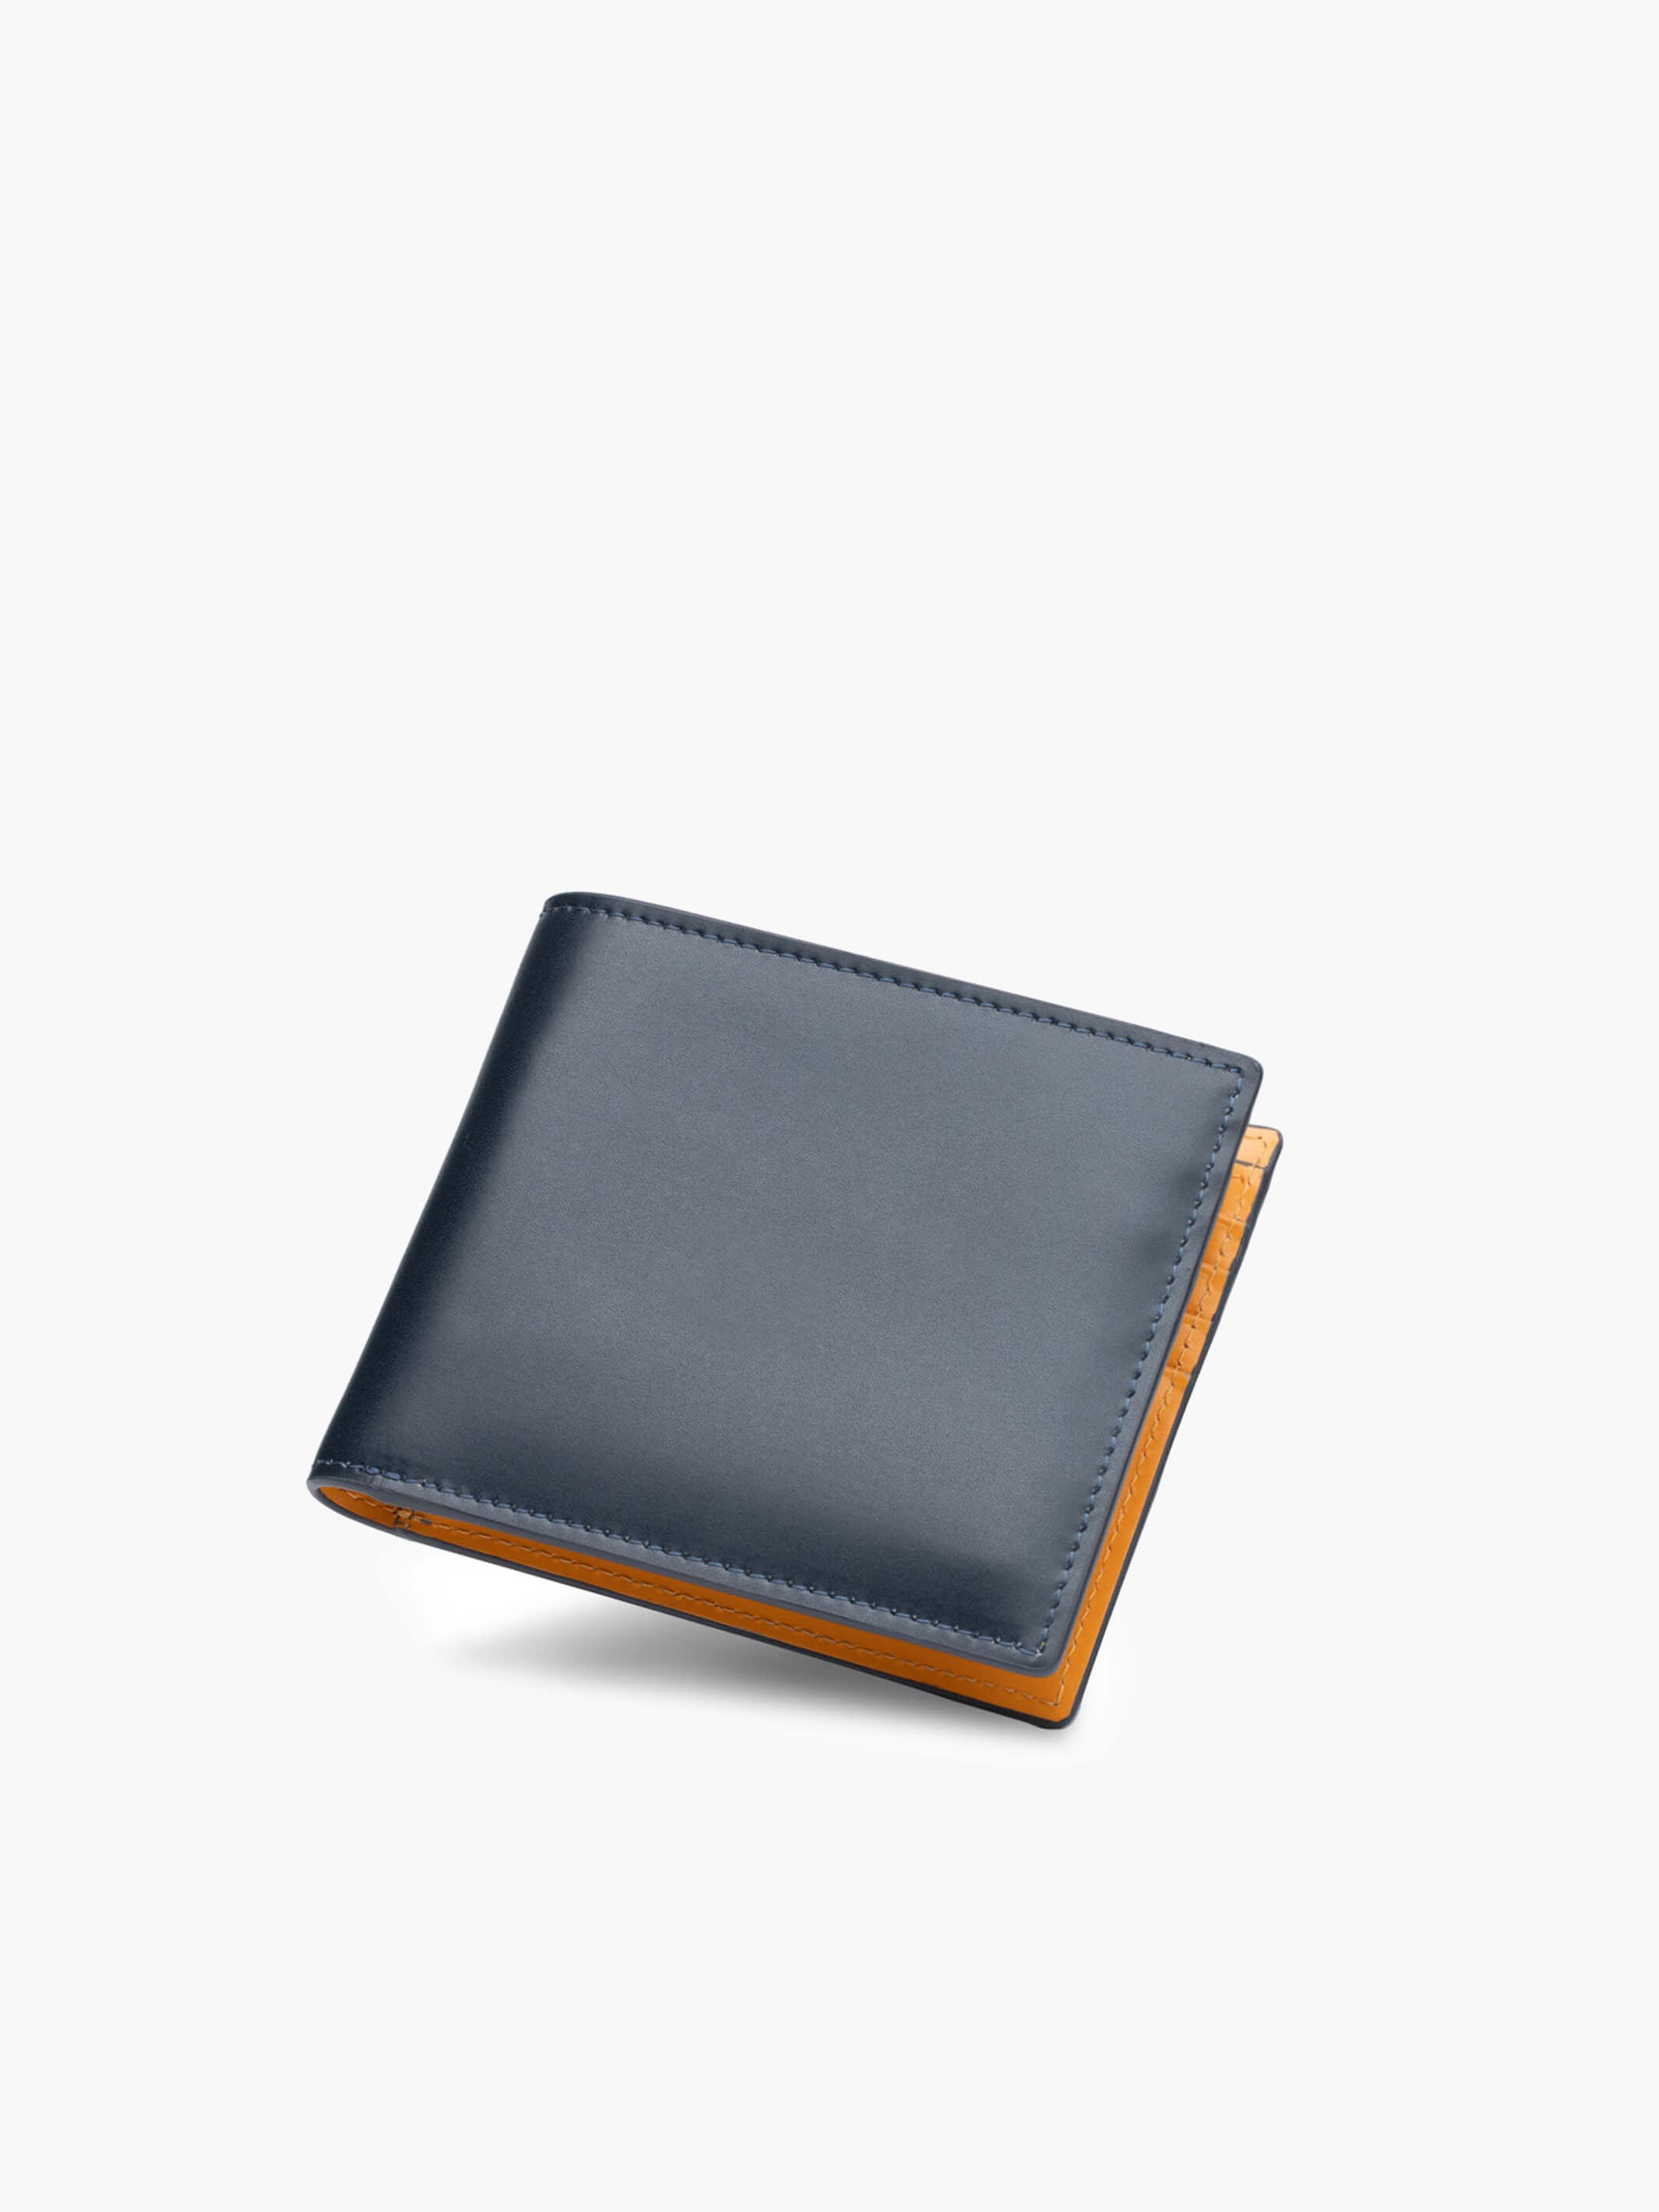 Picasso and Co Slim Wallet Money Clip in Calf Leather Black, Brown, Blue, Navy Blue, Tan and Gray